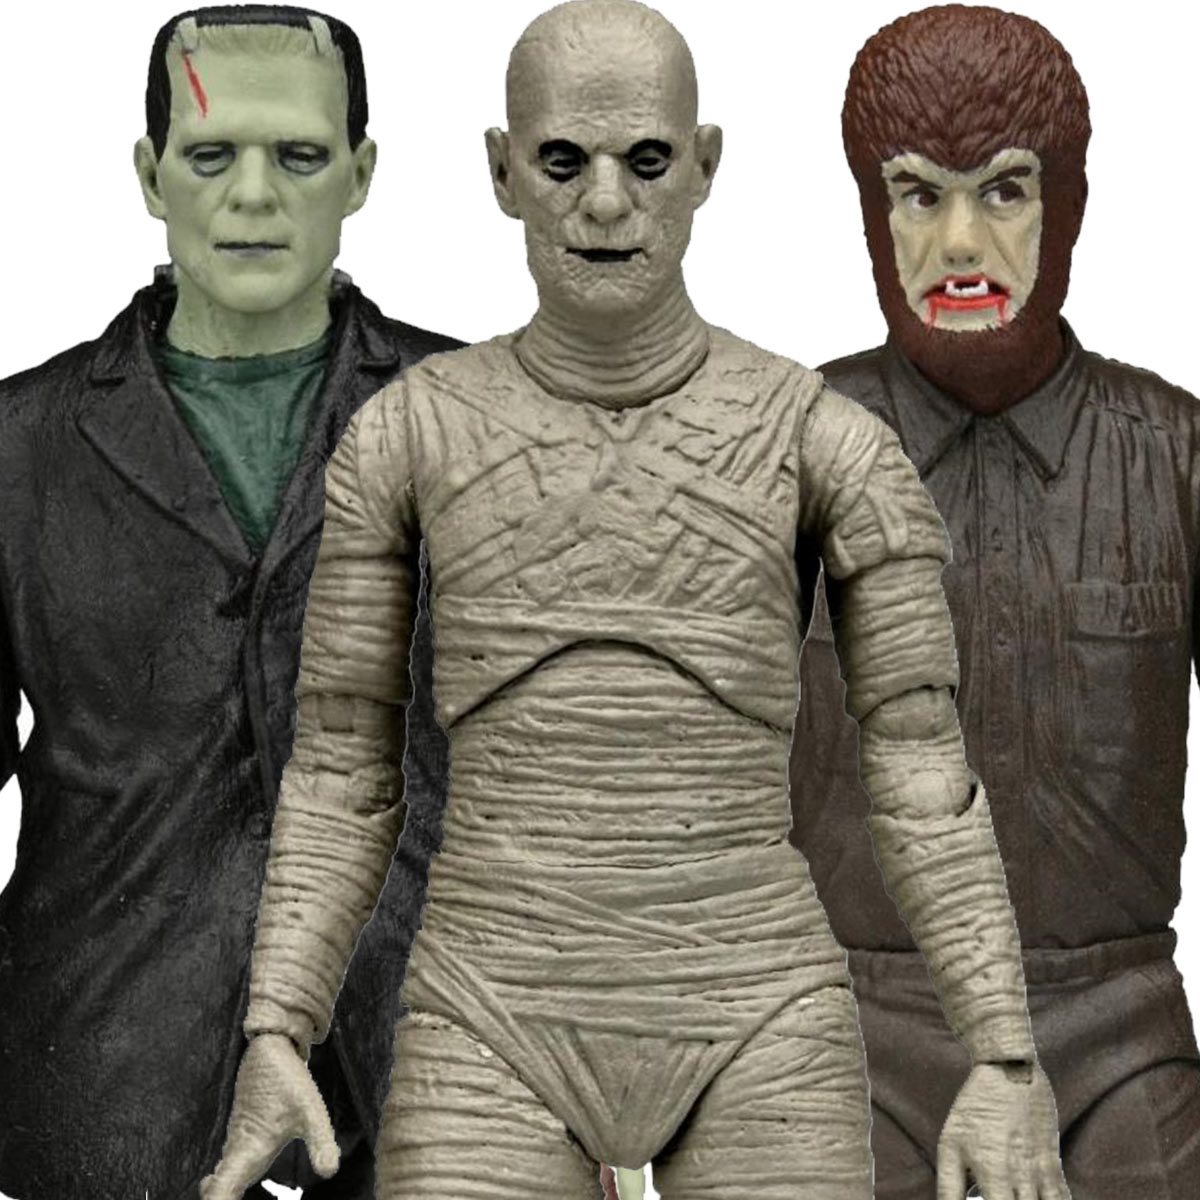 Universal Monsters Retro Glow-in-the-Dark 7-Inch Scale Action Figure Assortment Set of 3